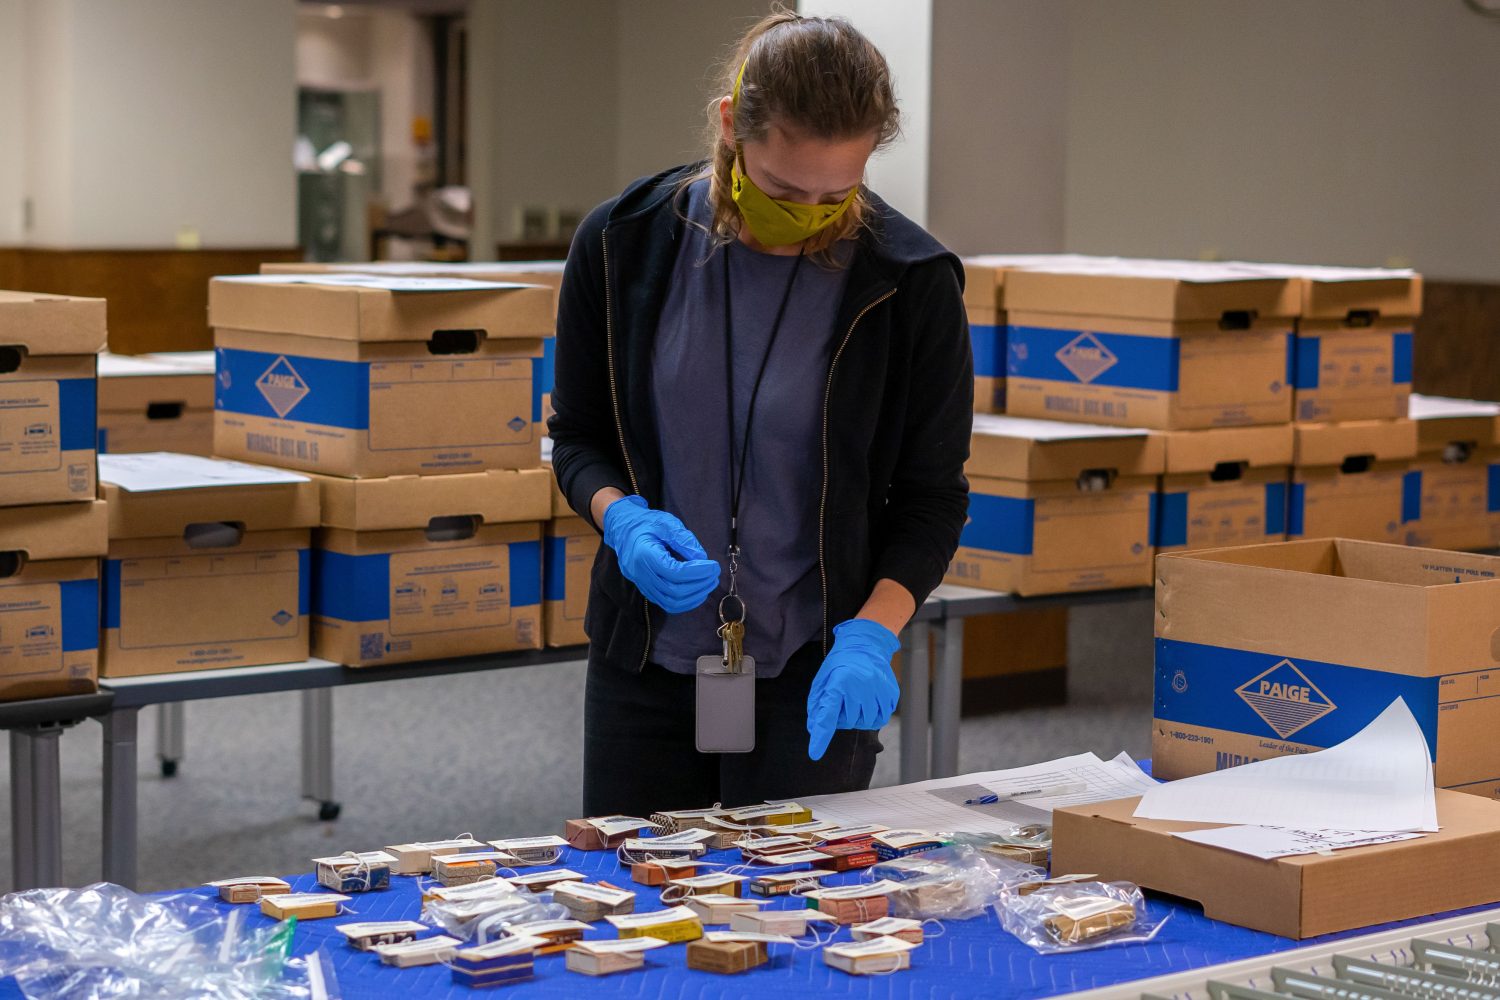 Conservation specialist Anna Shepherd is wearing a mask and gloves as she matches up pharmaceutical boxes with their corresponding bar codes.